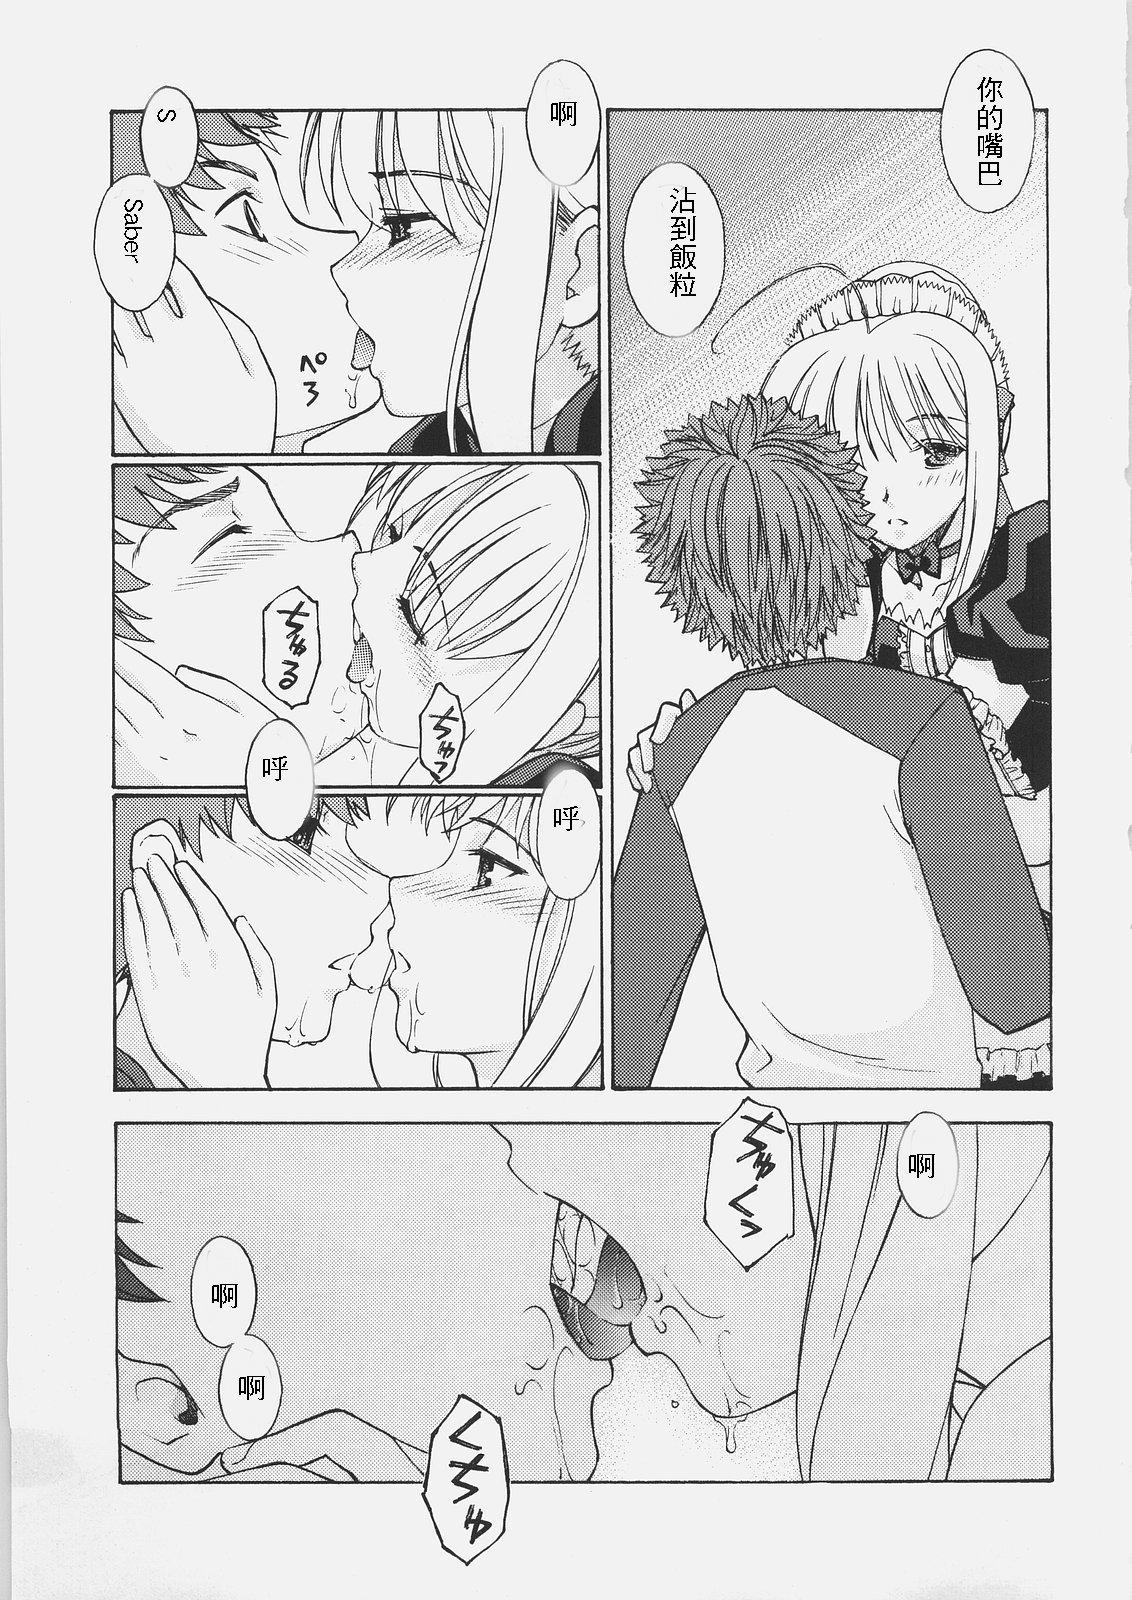 Weird HUNGRY LOVER - Fate stay night Twistys - Page 11